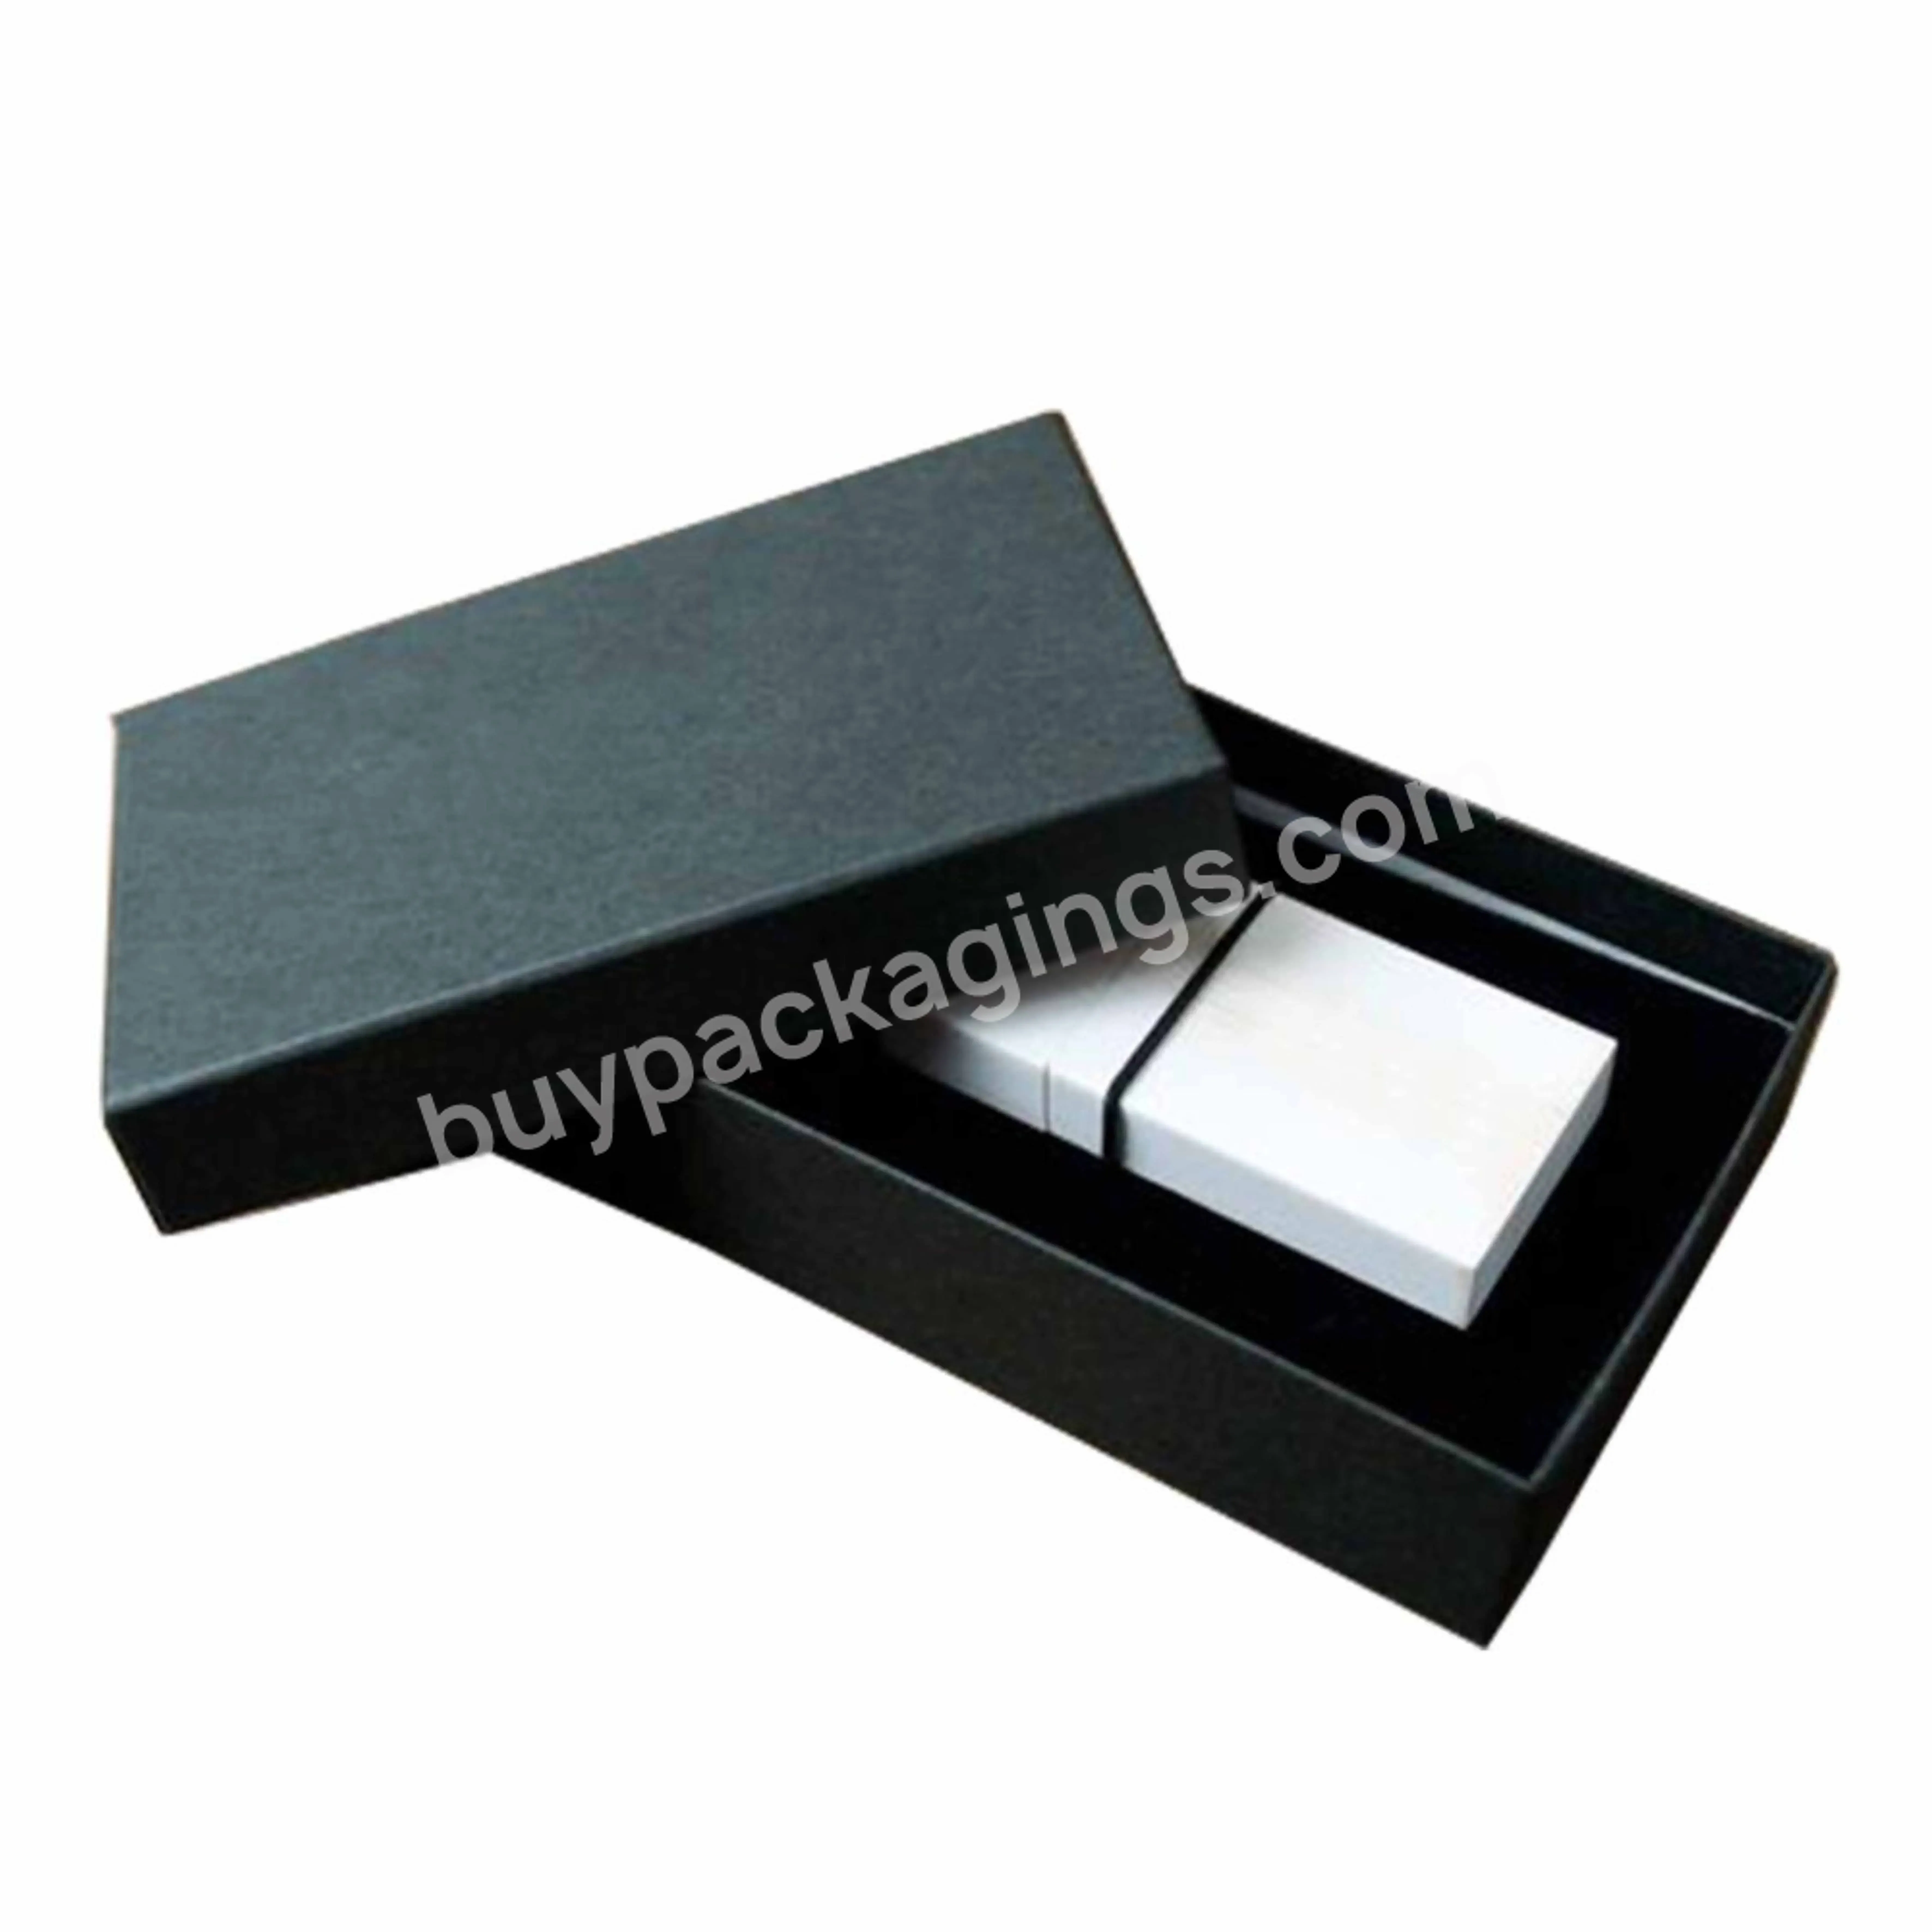 High End Usb Flash Drive Packaging Box With Cut Out Eva/ Foam Inset